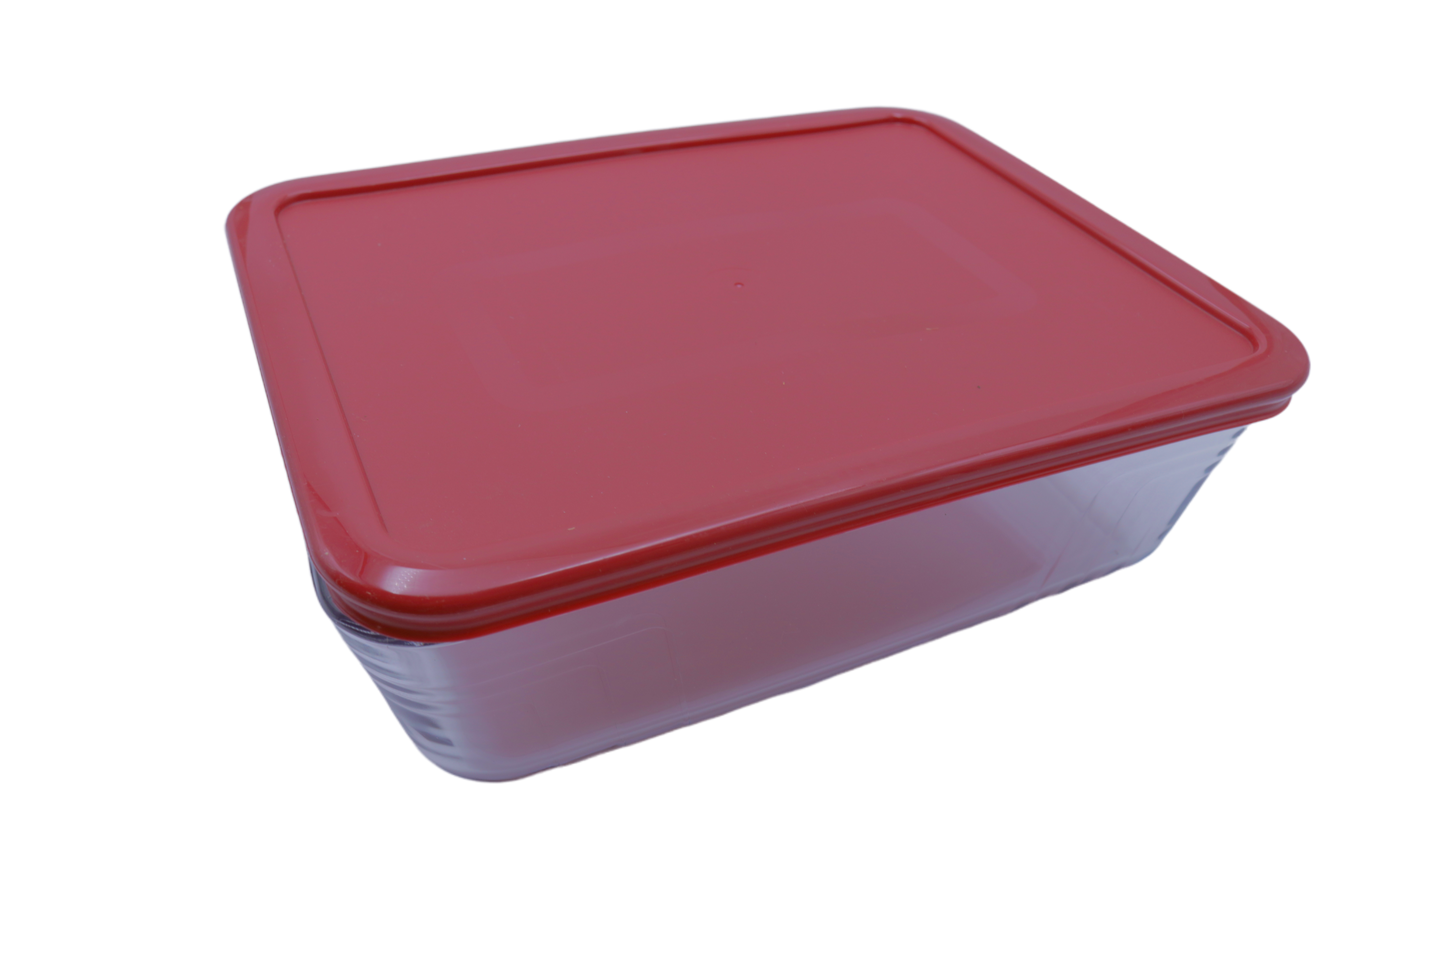 Set of three rectangular glass lunch boxes pyrex cooFreeze red lid